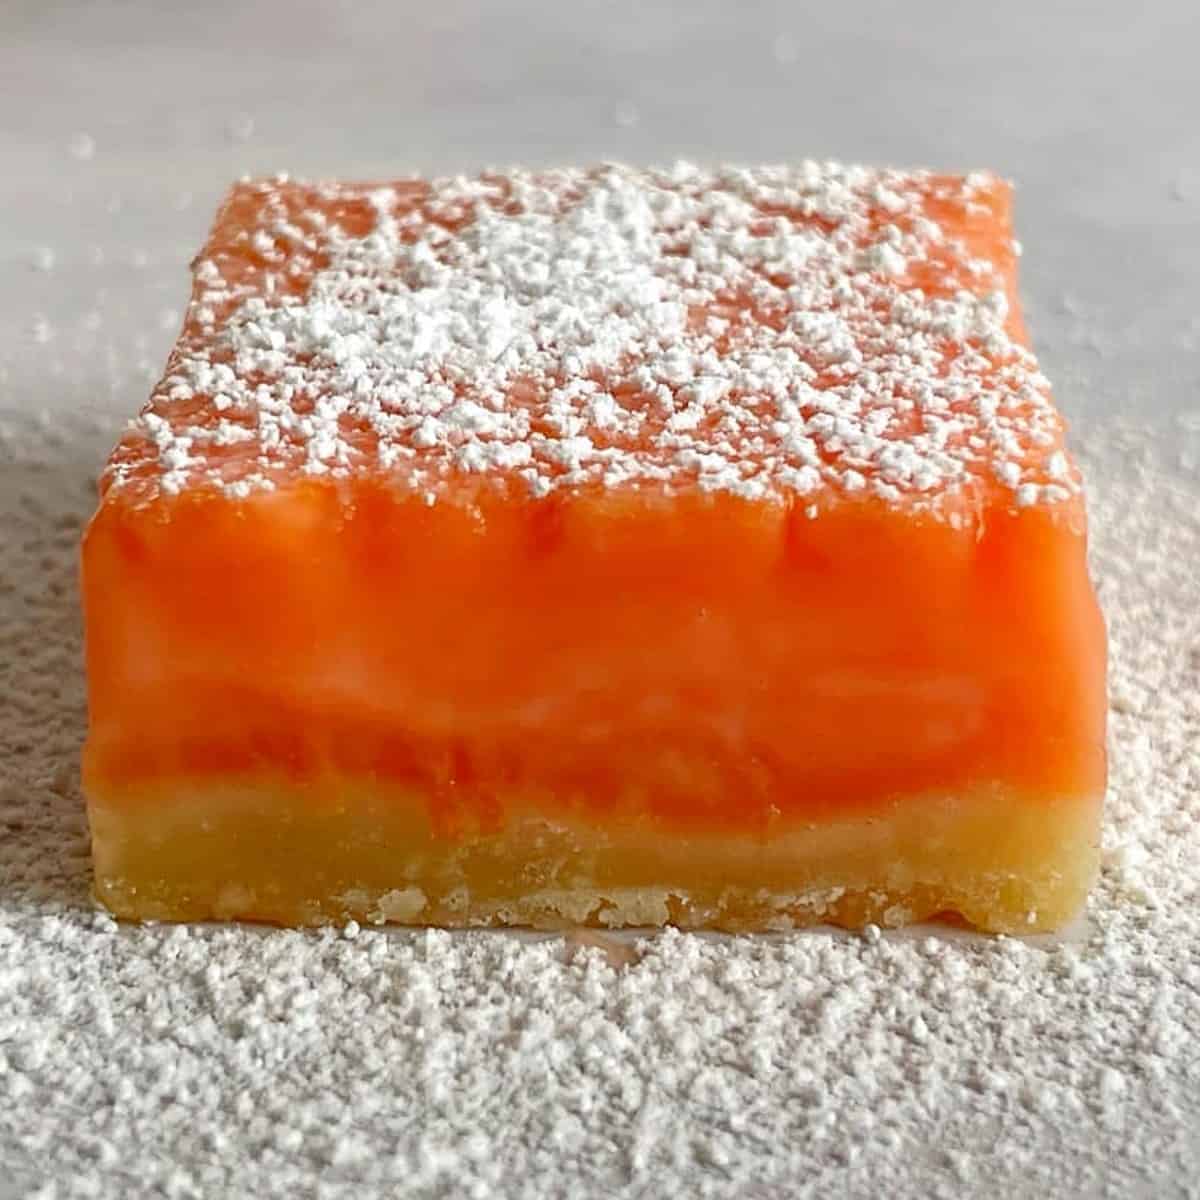 grapefruit-bar-with-powdered-sugar-speinkled-on-top